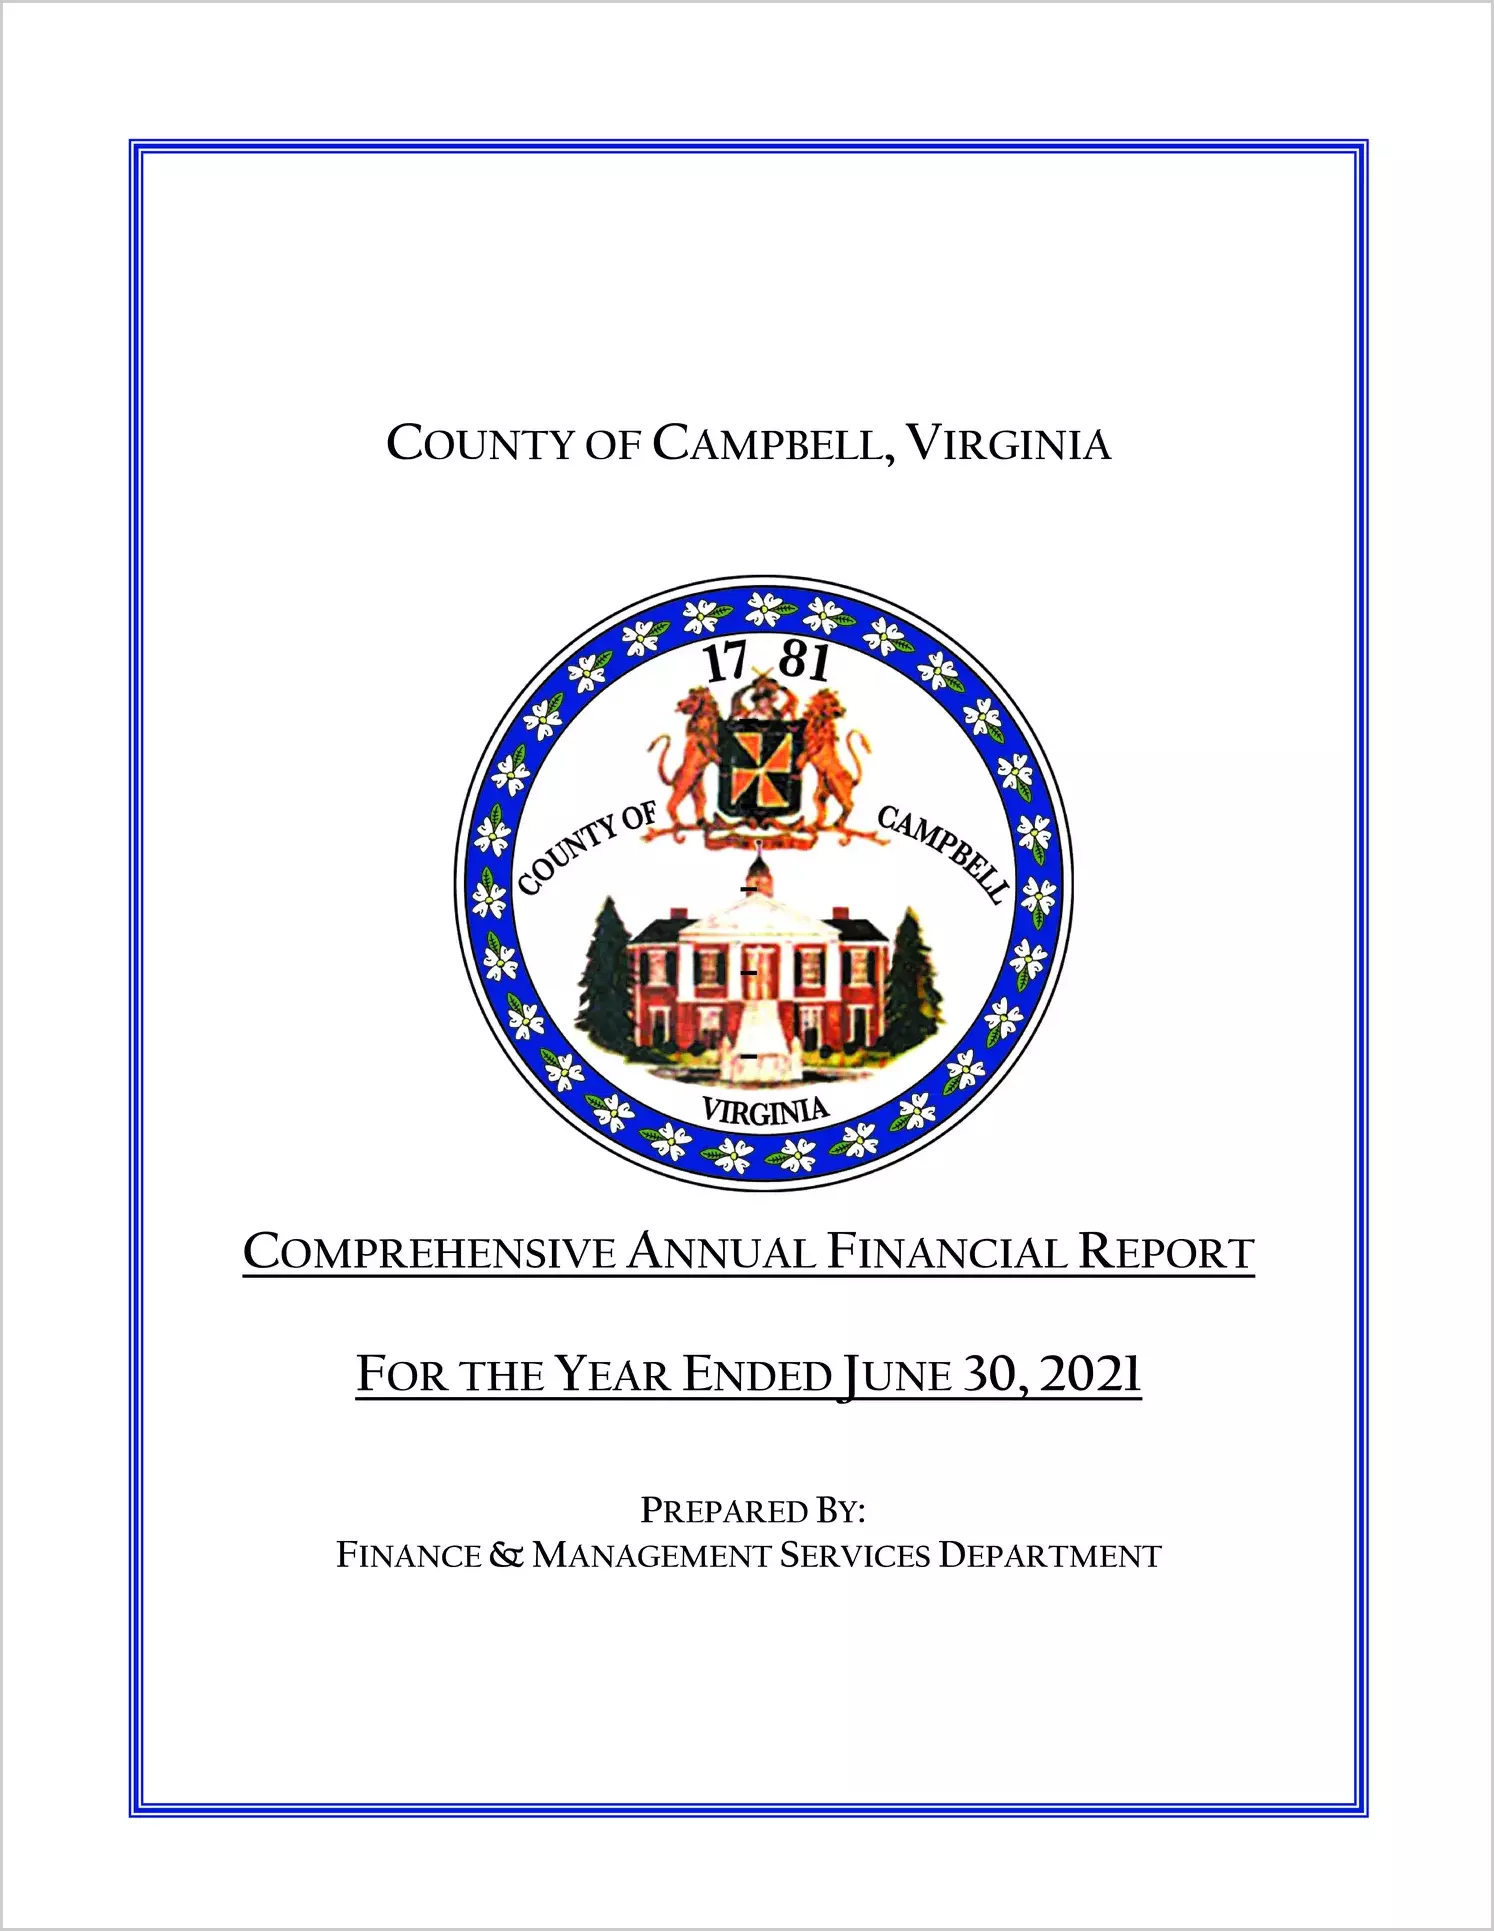 2021 Annual Financial Report for County of Campbell